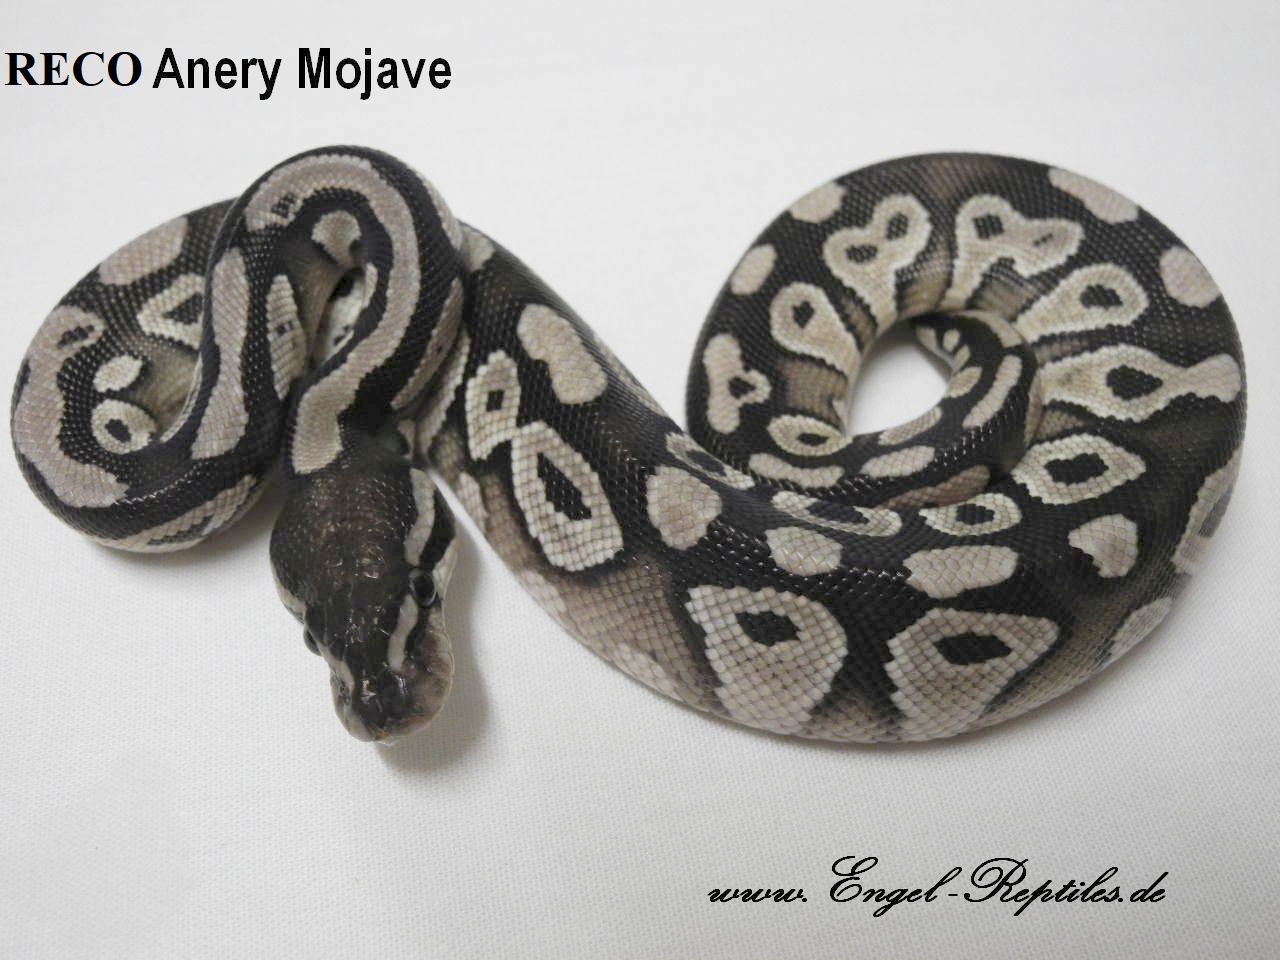 RECO Anery Mojave by Engel Reptiles